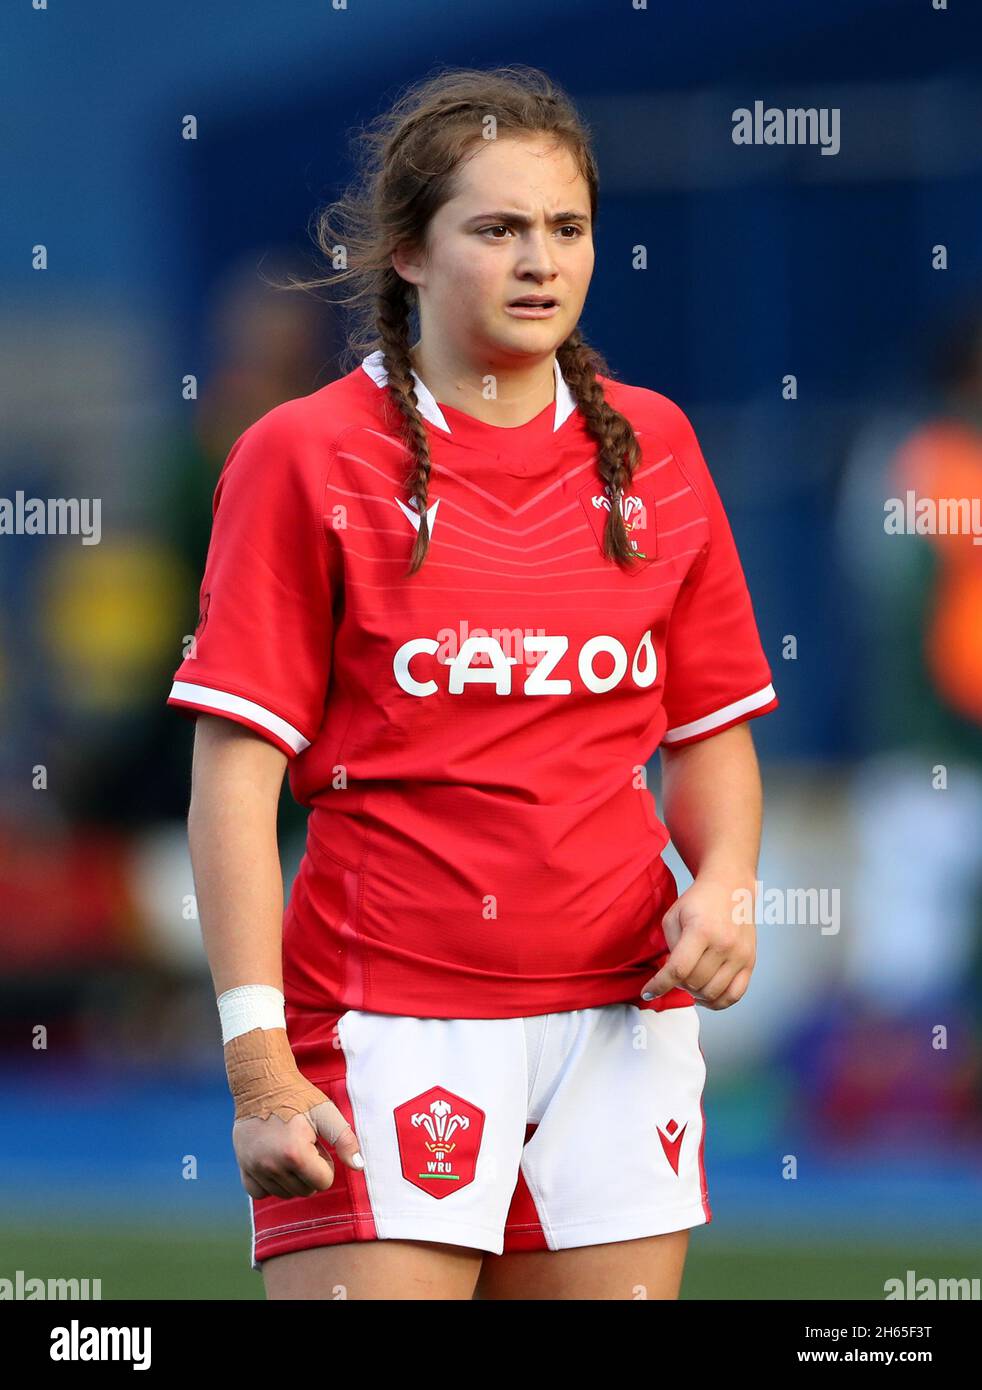 Wales' Caitlin Lewis during the Autumn International match at Cardiff Arms park, Cardiff. Picture date: Saturday November 13, 2021. See PA story RUGBYU Wales Women. Photo credit should read: Bradley Collyer/PA Wire. RESTRICTIONS: Use subject to restrictions. Editorial use only, no commercial use without prior consent from rights holder. Stock Photo